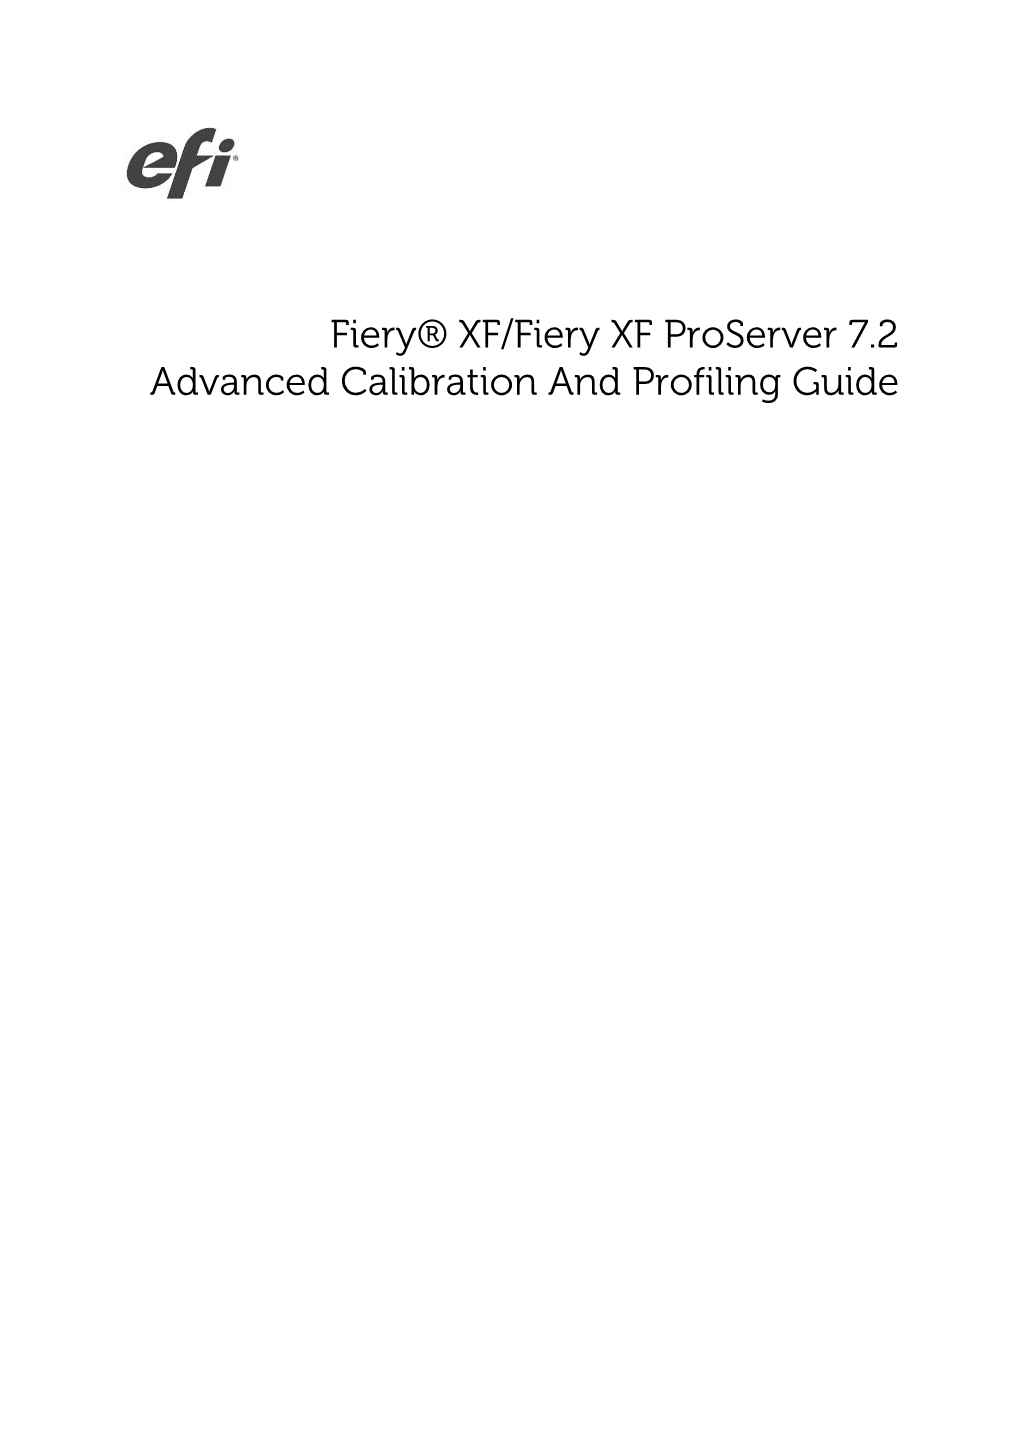 Fiery® XF/Fiery XF Proserver 7.2 Advanced Calibration and Profiling Guide